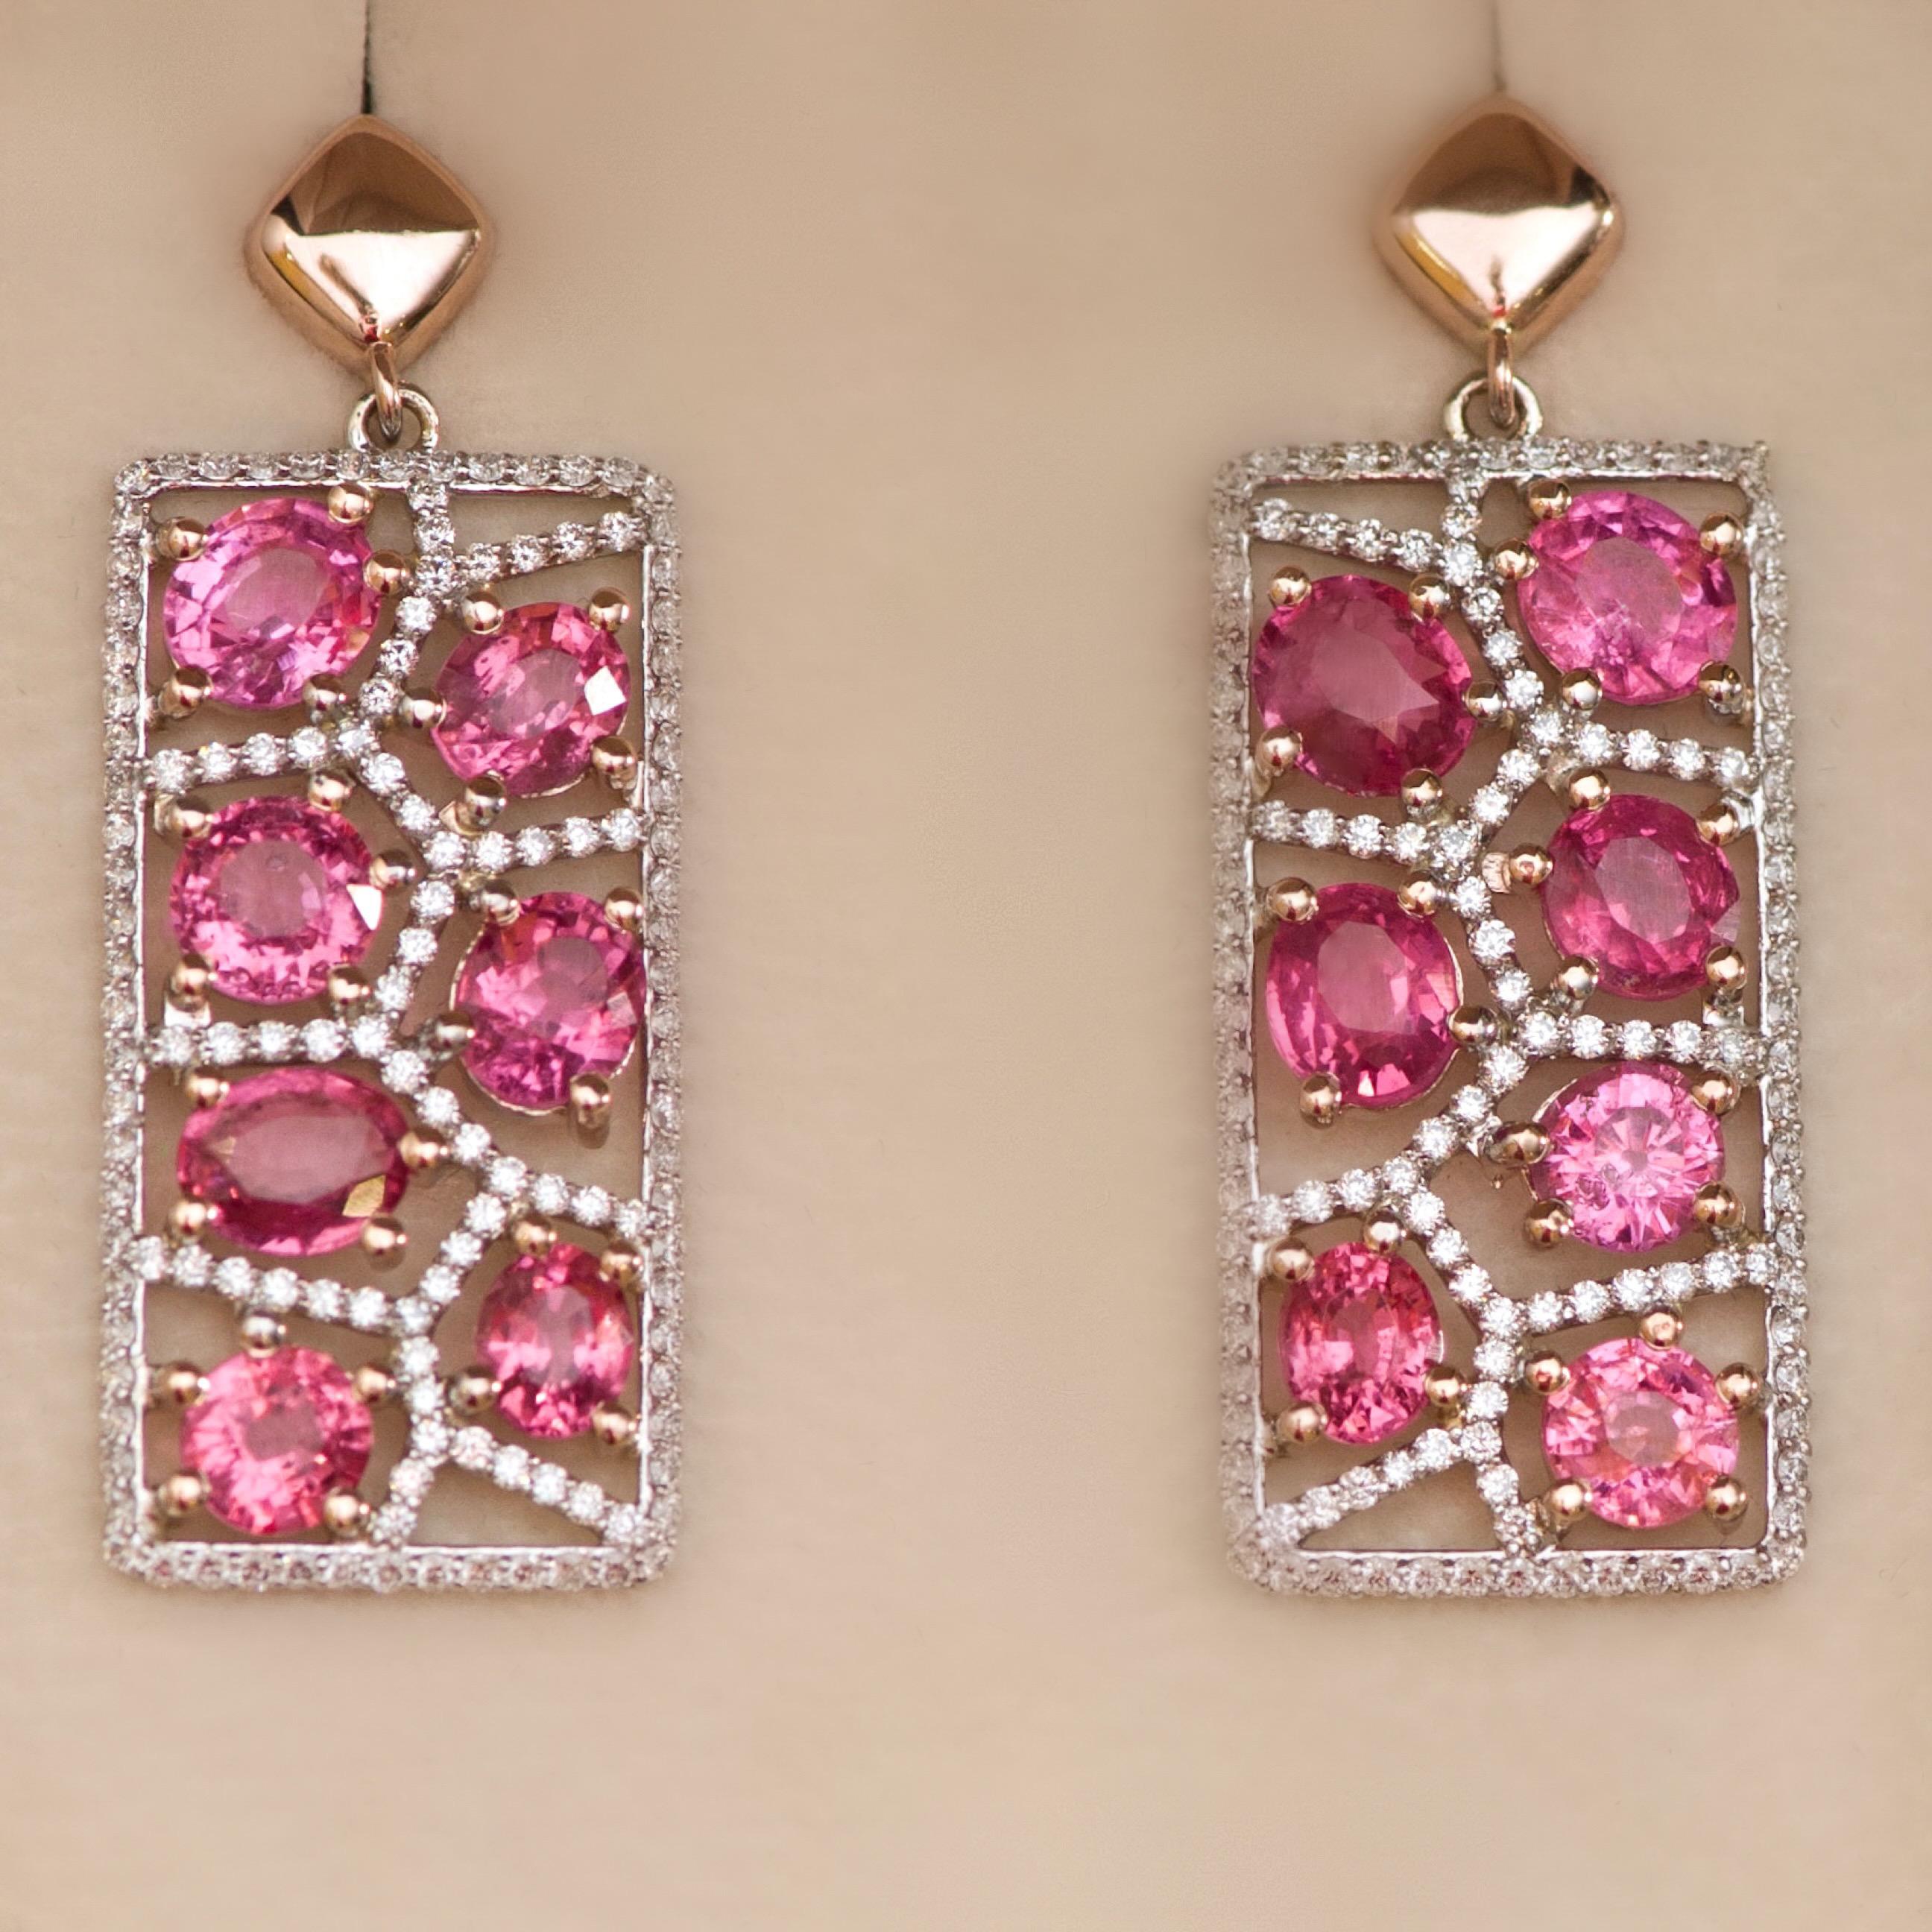 Light and very unusual carved earrings from rose and white gold with Mahenge spinel and small diamonds.
We love Mahenge spinel very much, it makes any jewelry bright and memorable. 
The pink color is trendy now, and it is simply impossible to find